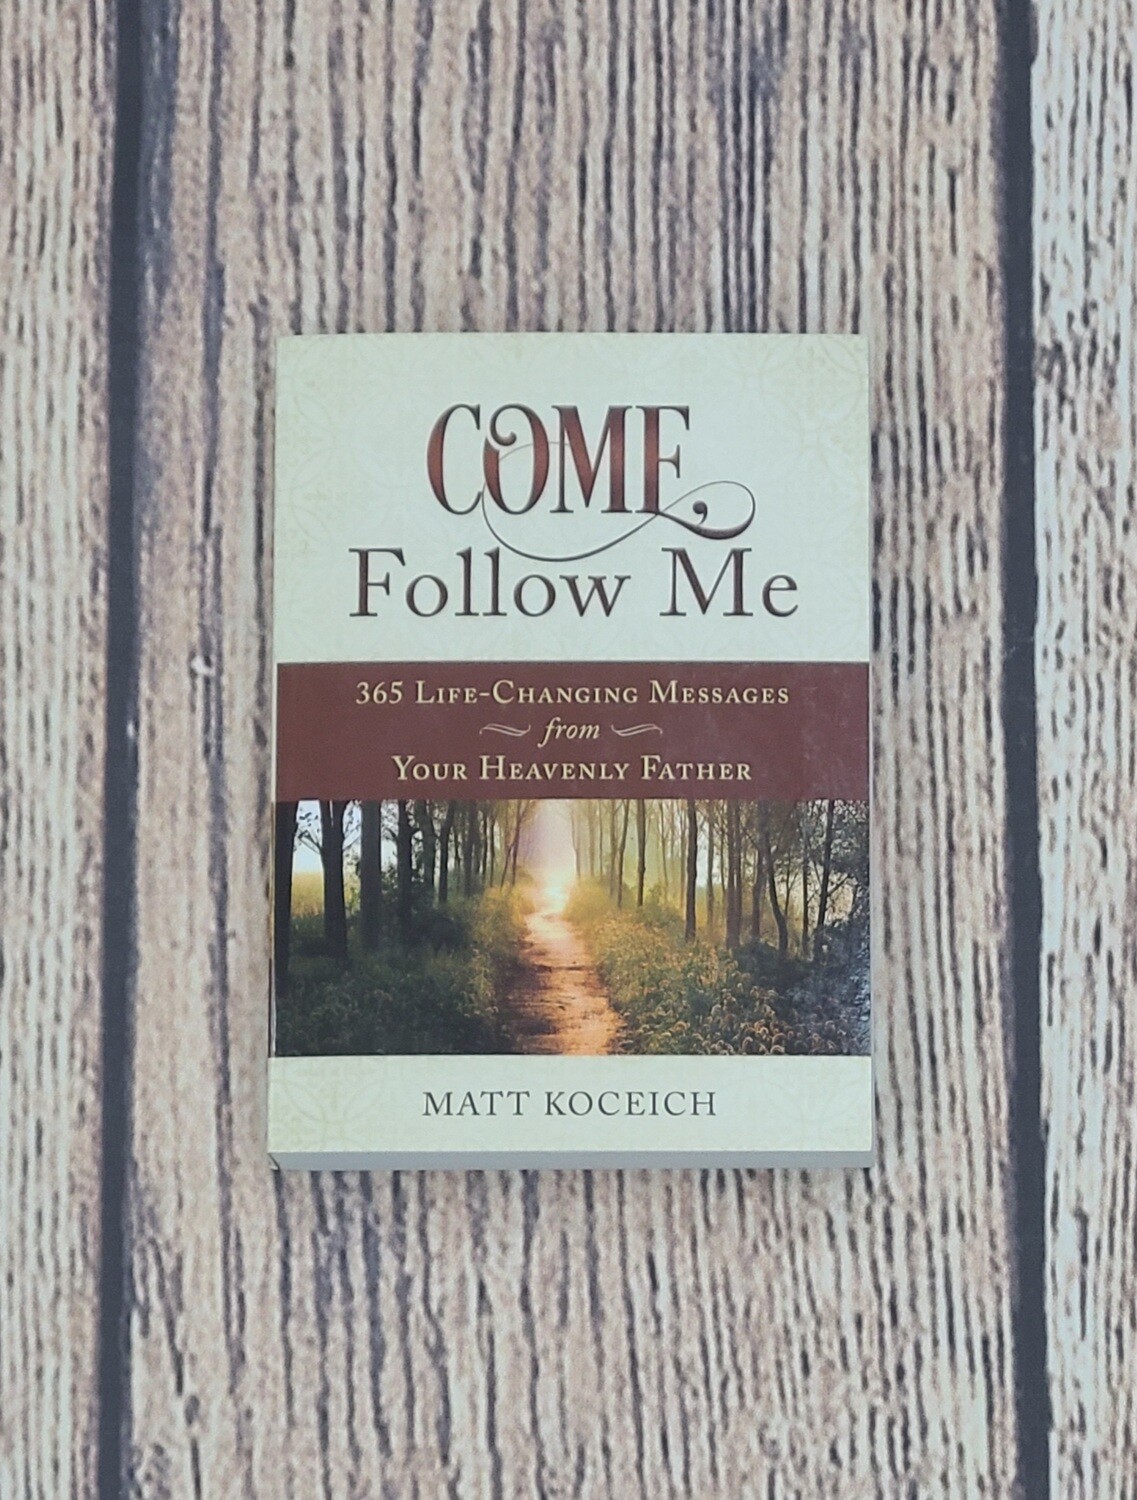 Come, Follow Me: 365 Life -Changing Messages from Your Heavenly Father by Matt Koceich - New